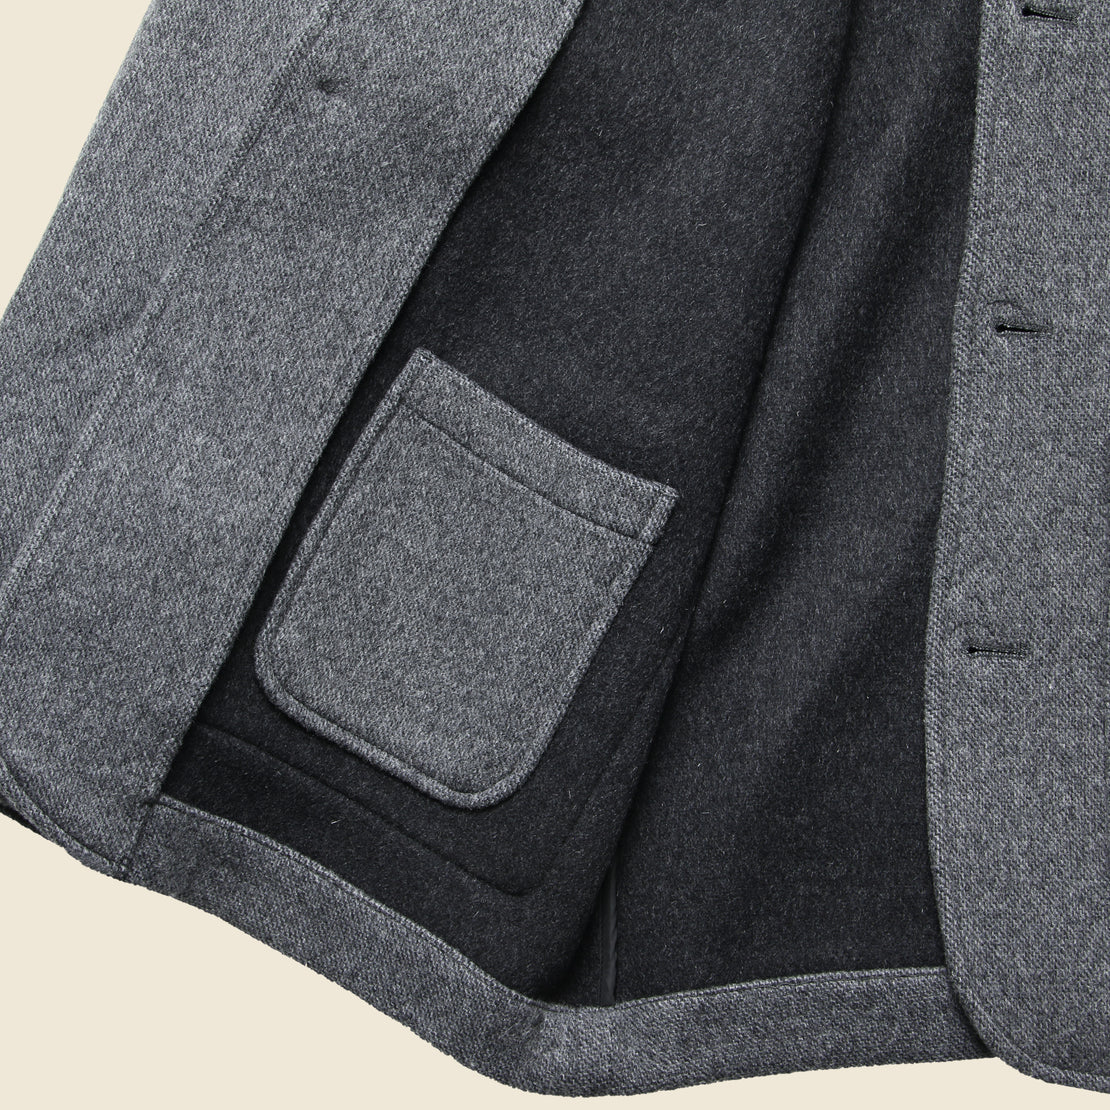 Chore Coat - Grey - Faherty - STAG Provisions - Outerwear - Shirt Jacket